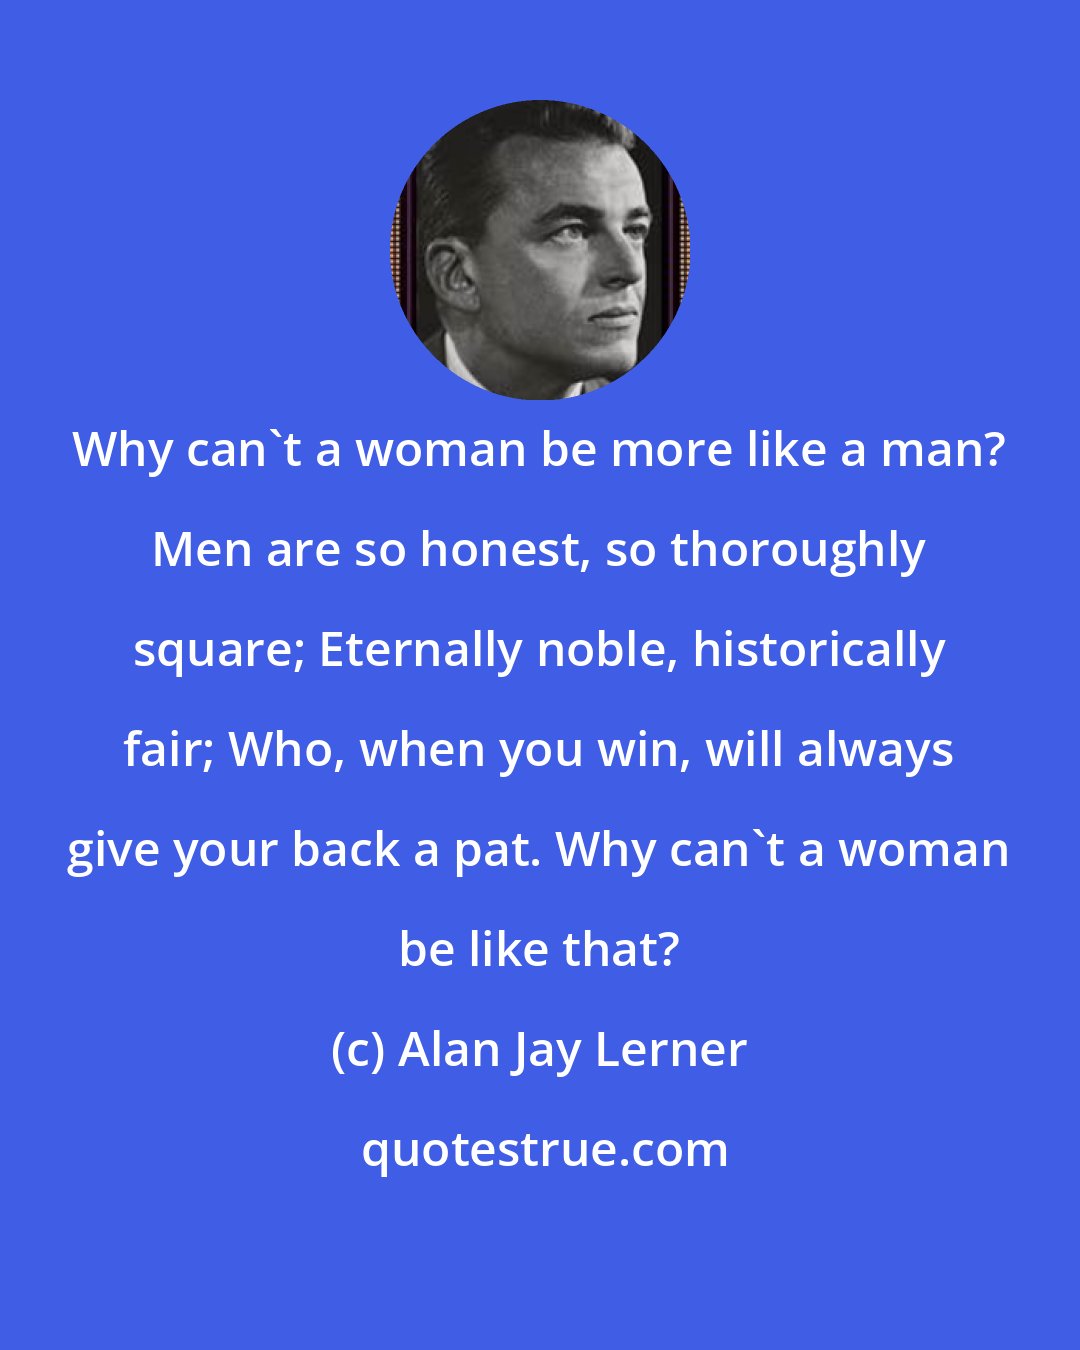 Alan Jay Lerner: Why can't a woman be more like a man? Men are so honest, so thoroughly square; Eternally noble, historically fair; Who, when you win, will always give your back a pat. Why can't a woman be like that?